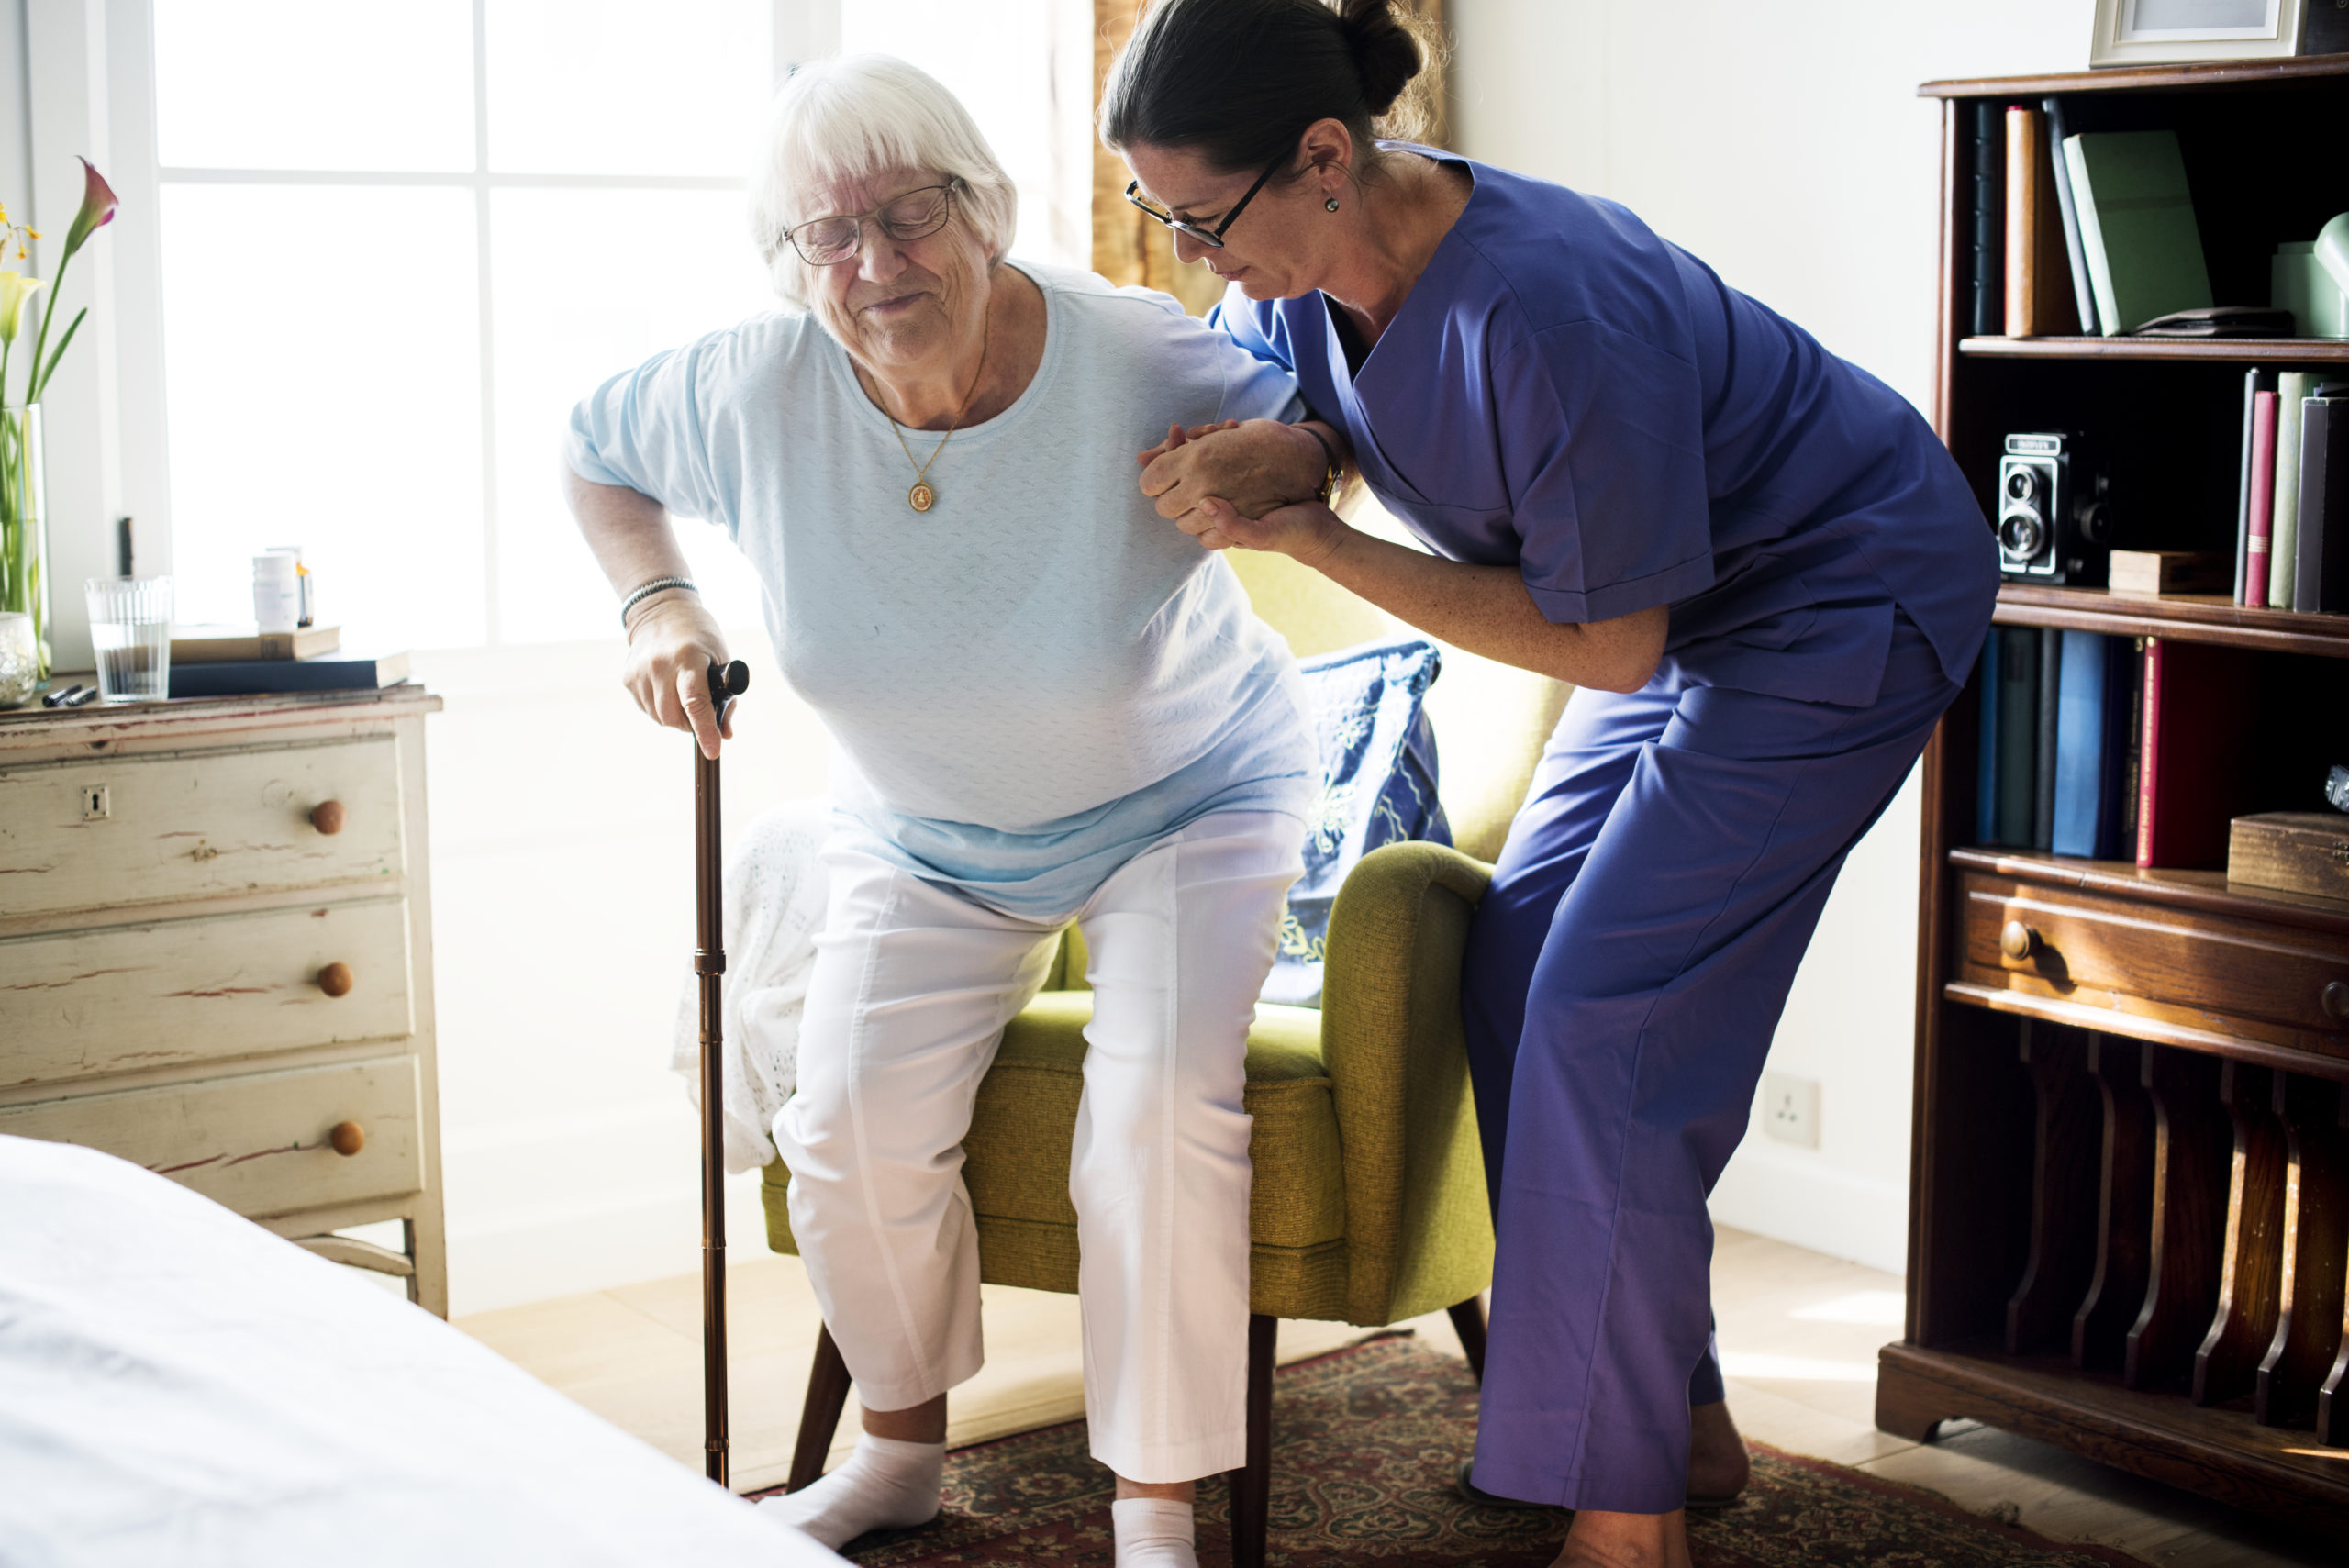 transitional care, in-home care, transition home, caregiving